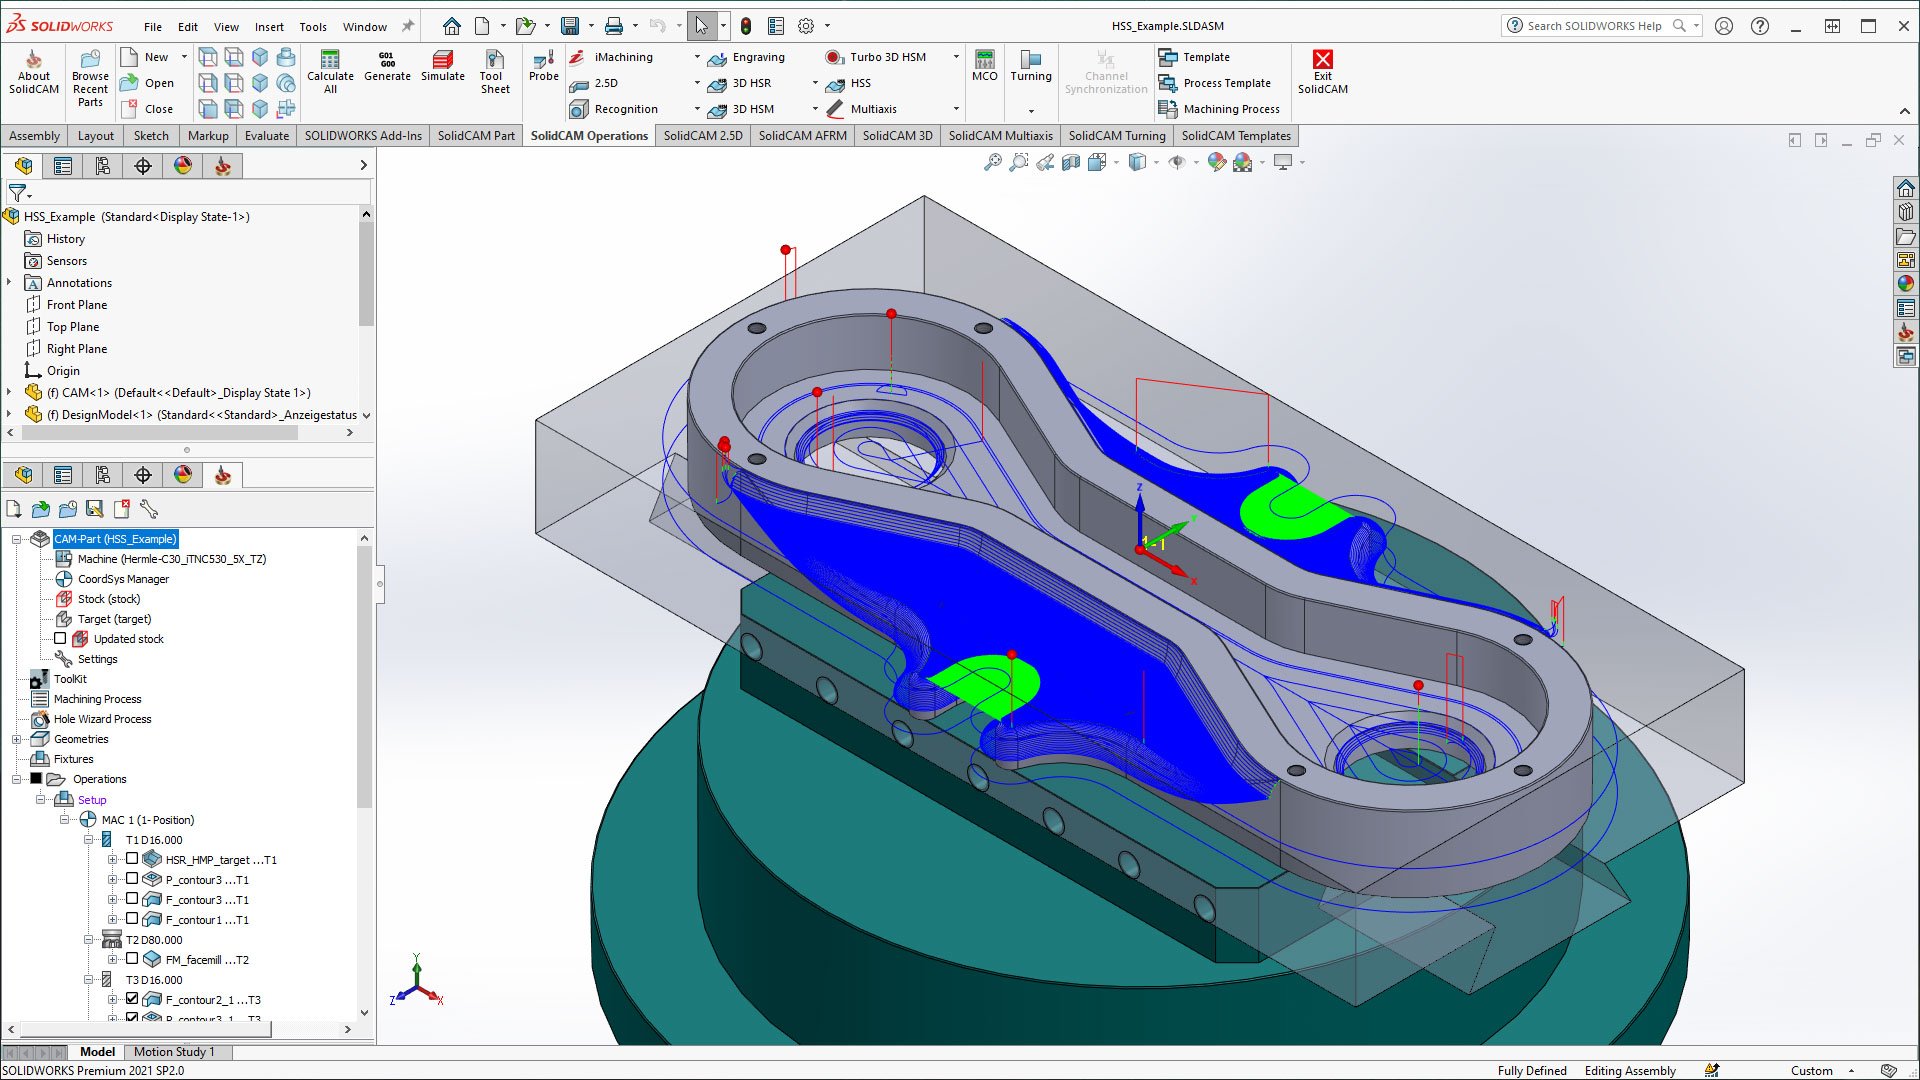 SolidCAM screen shot showing CAD model with toolpaths